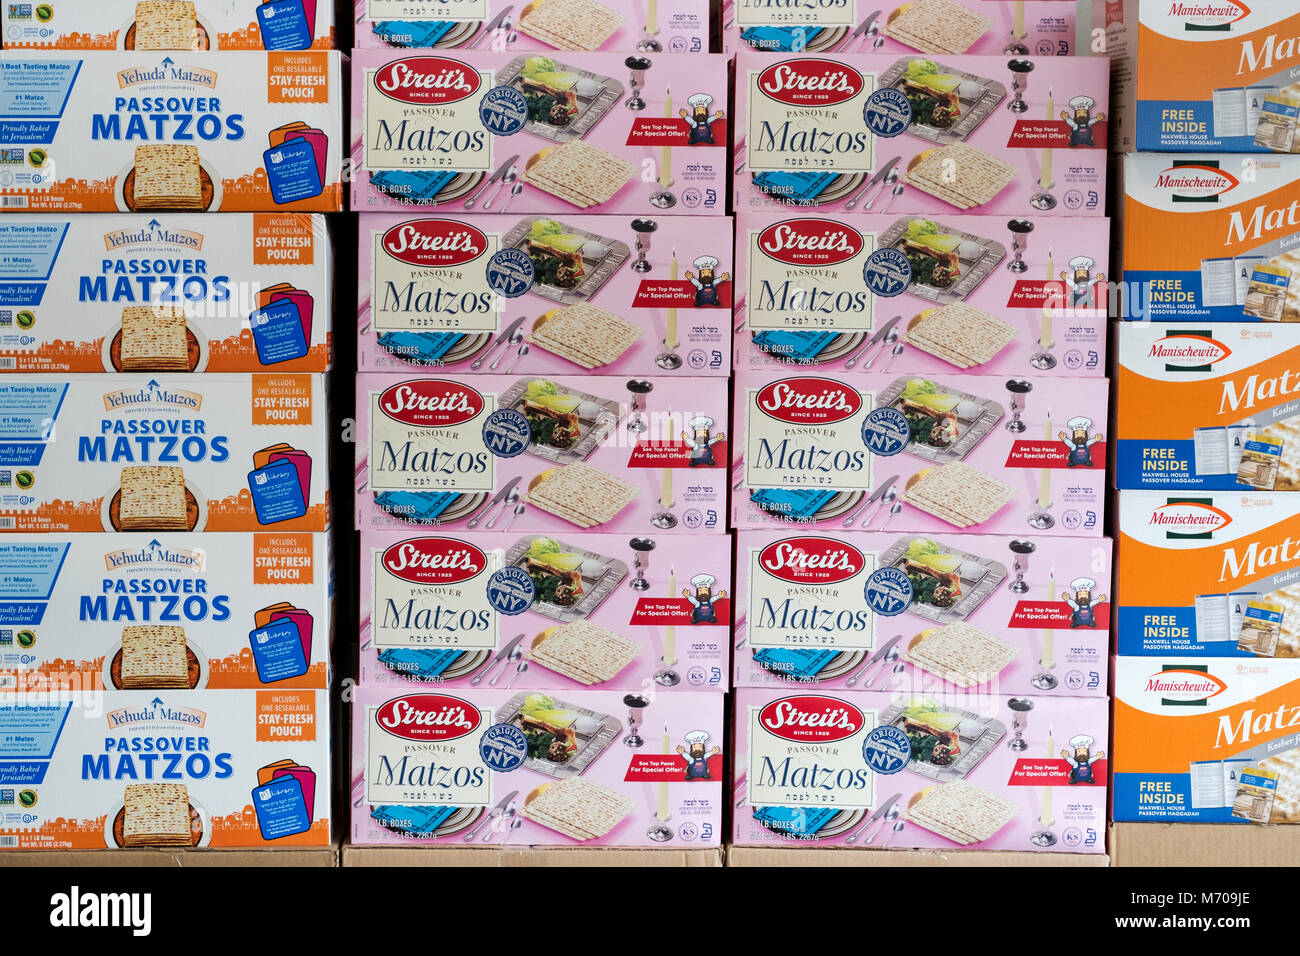 Boxes of matzoh for sale inside the Stop & Shop supermarket in Mt. Kisco, Westchester, New York. Stock Photo